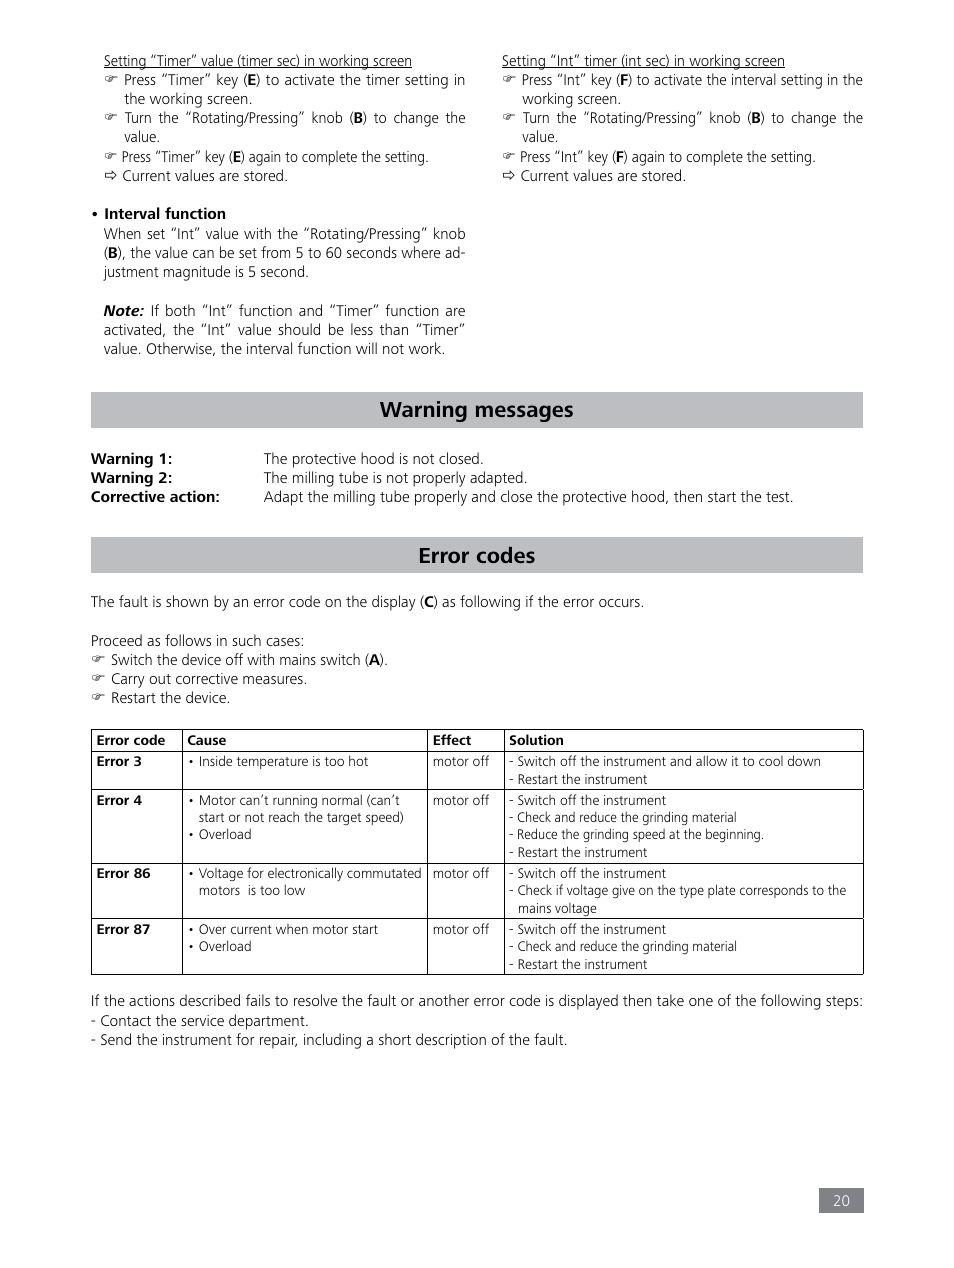 Warning messages, Error codes | IKA Tube Mill control User Manual | Page 20 / 64